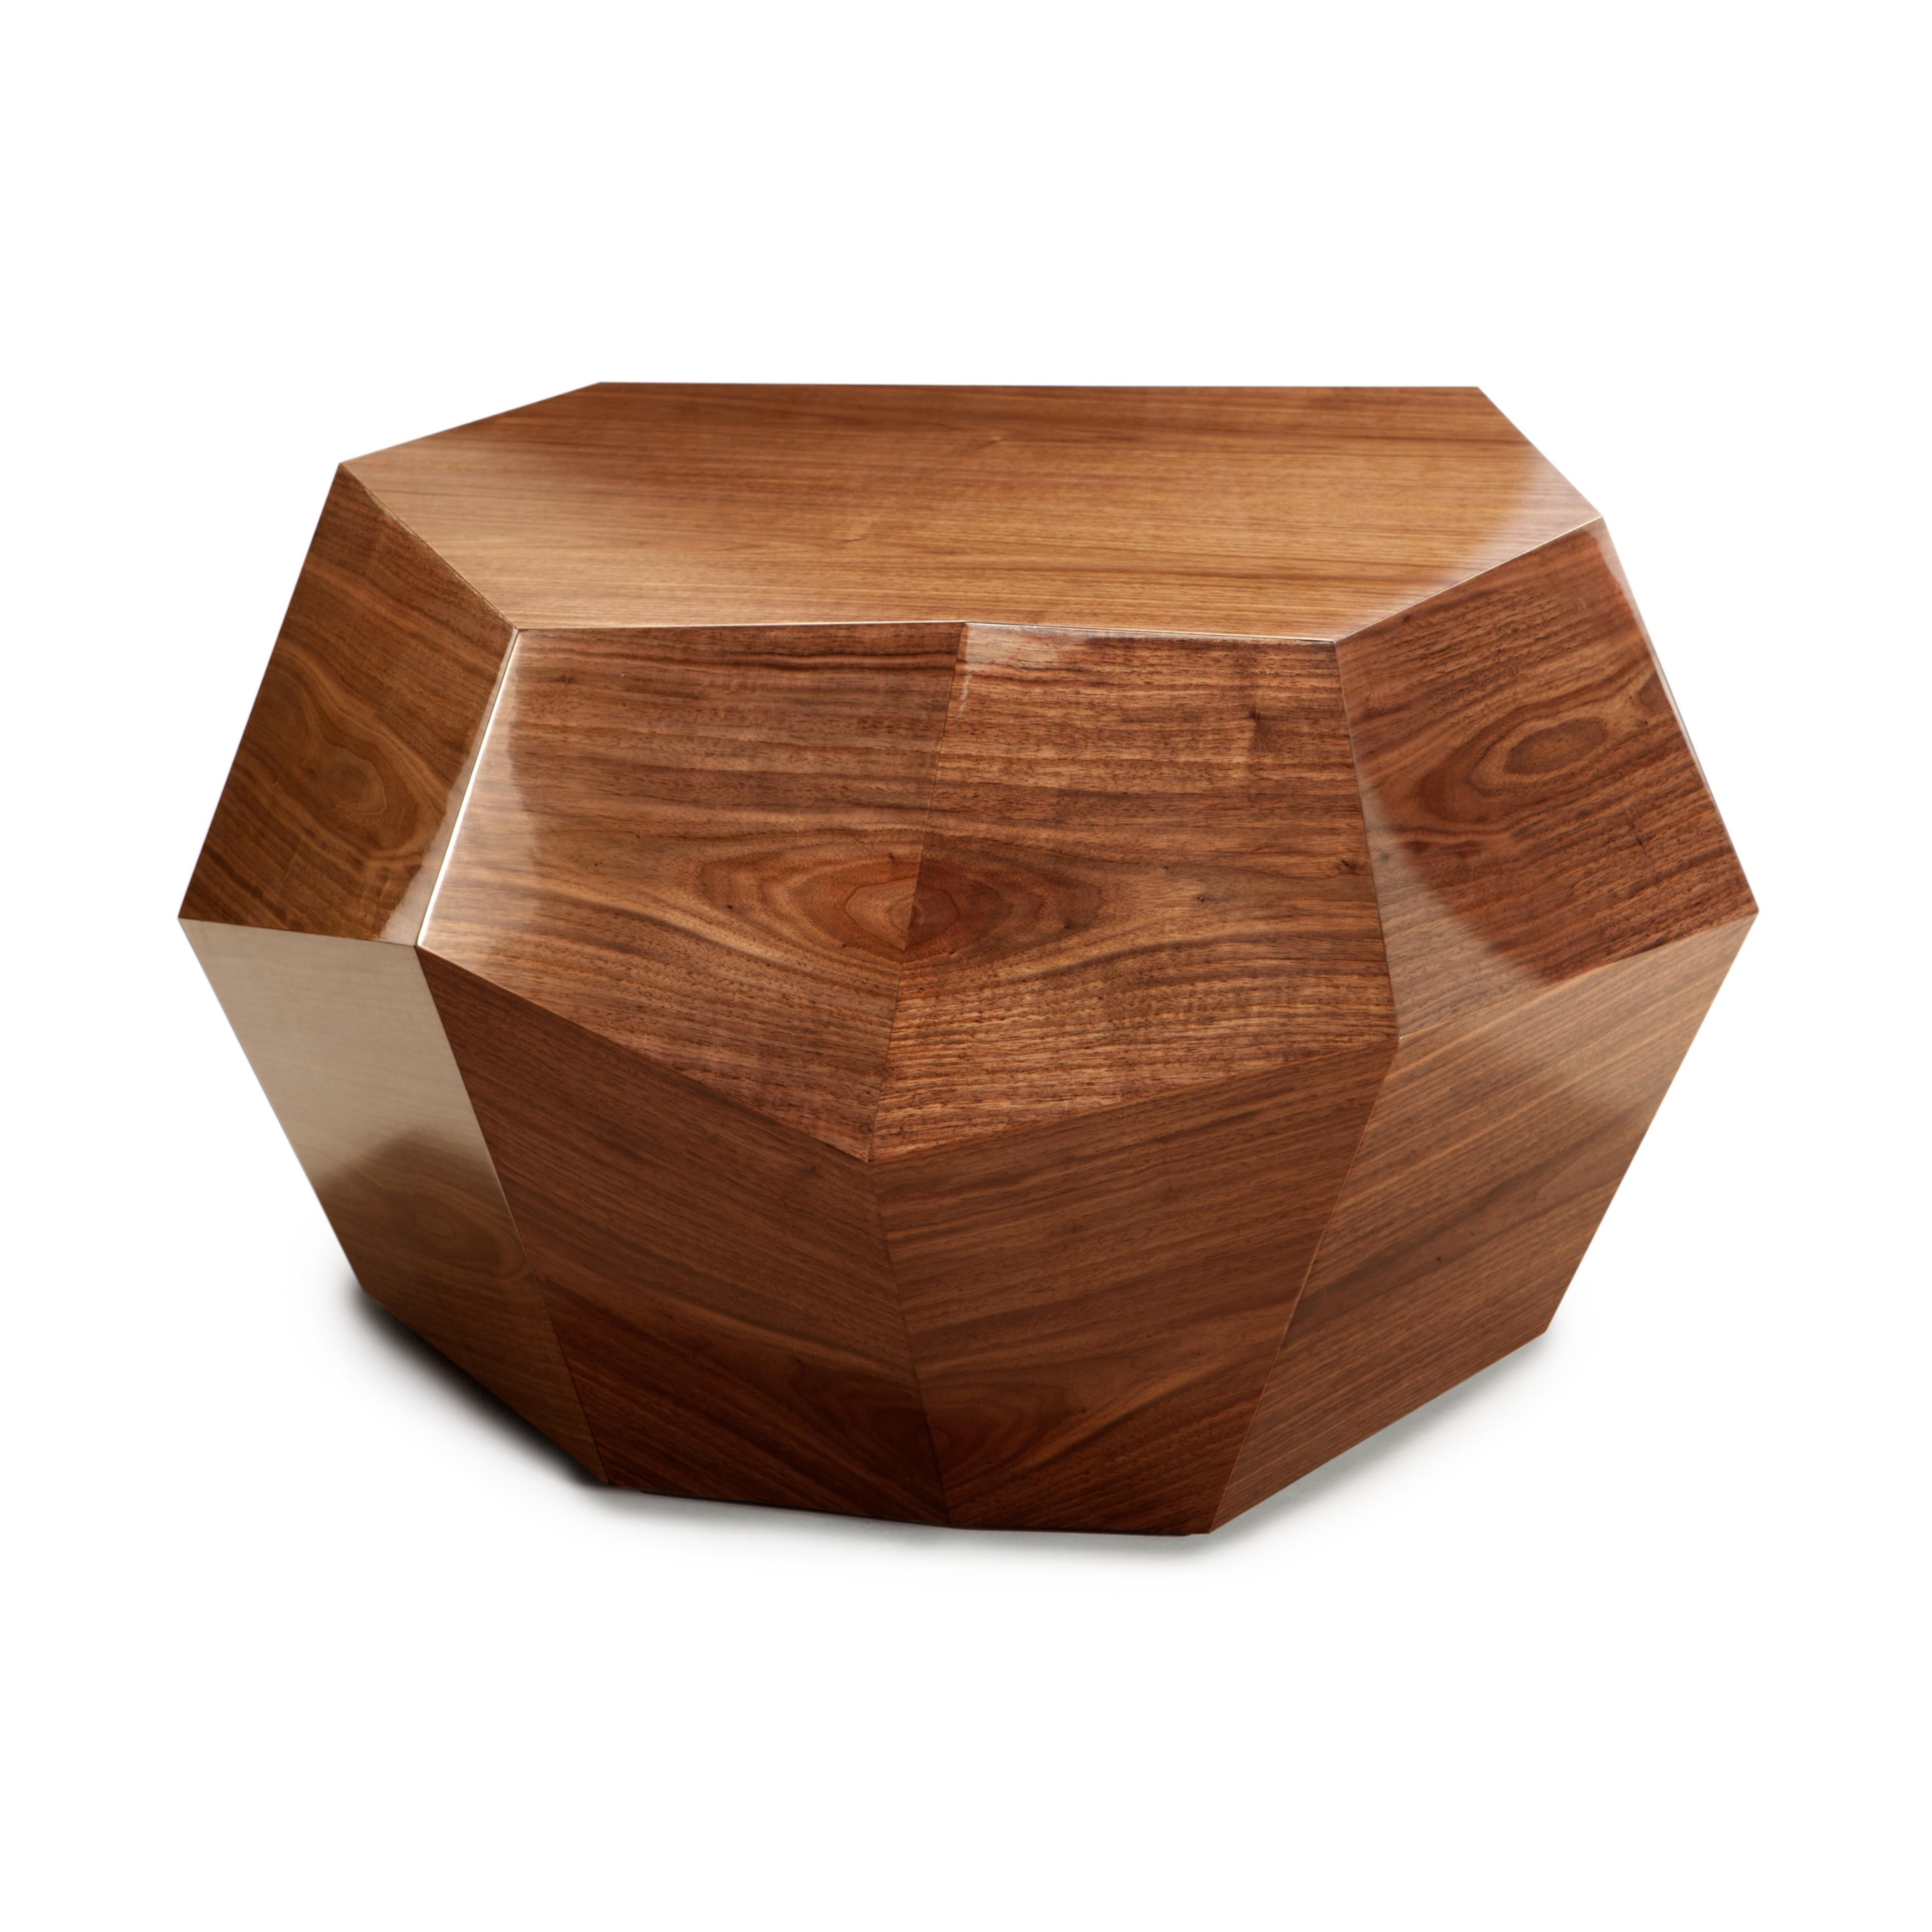 The original design of the three rocks tables was inspired by the Autumnal landscape with fallen leaves in burned tones. These tables are highly customized designs.
Beyond the original version, all three sizes can be customized with a large range